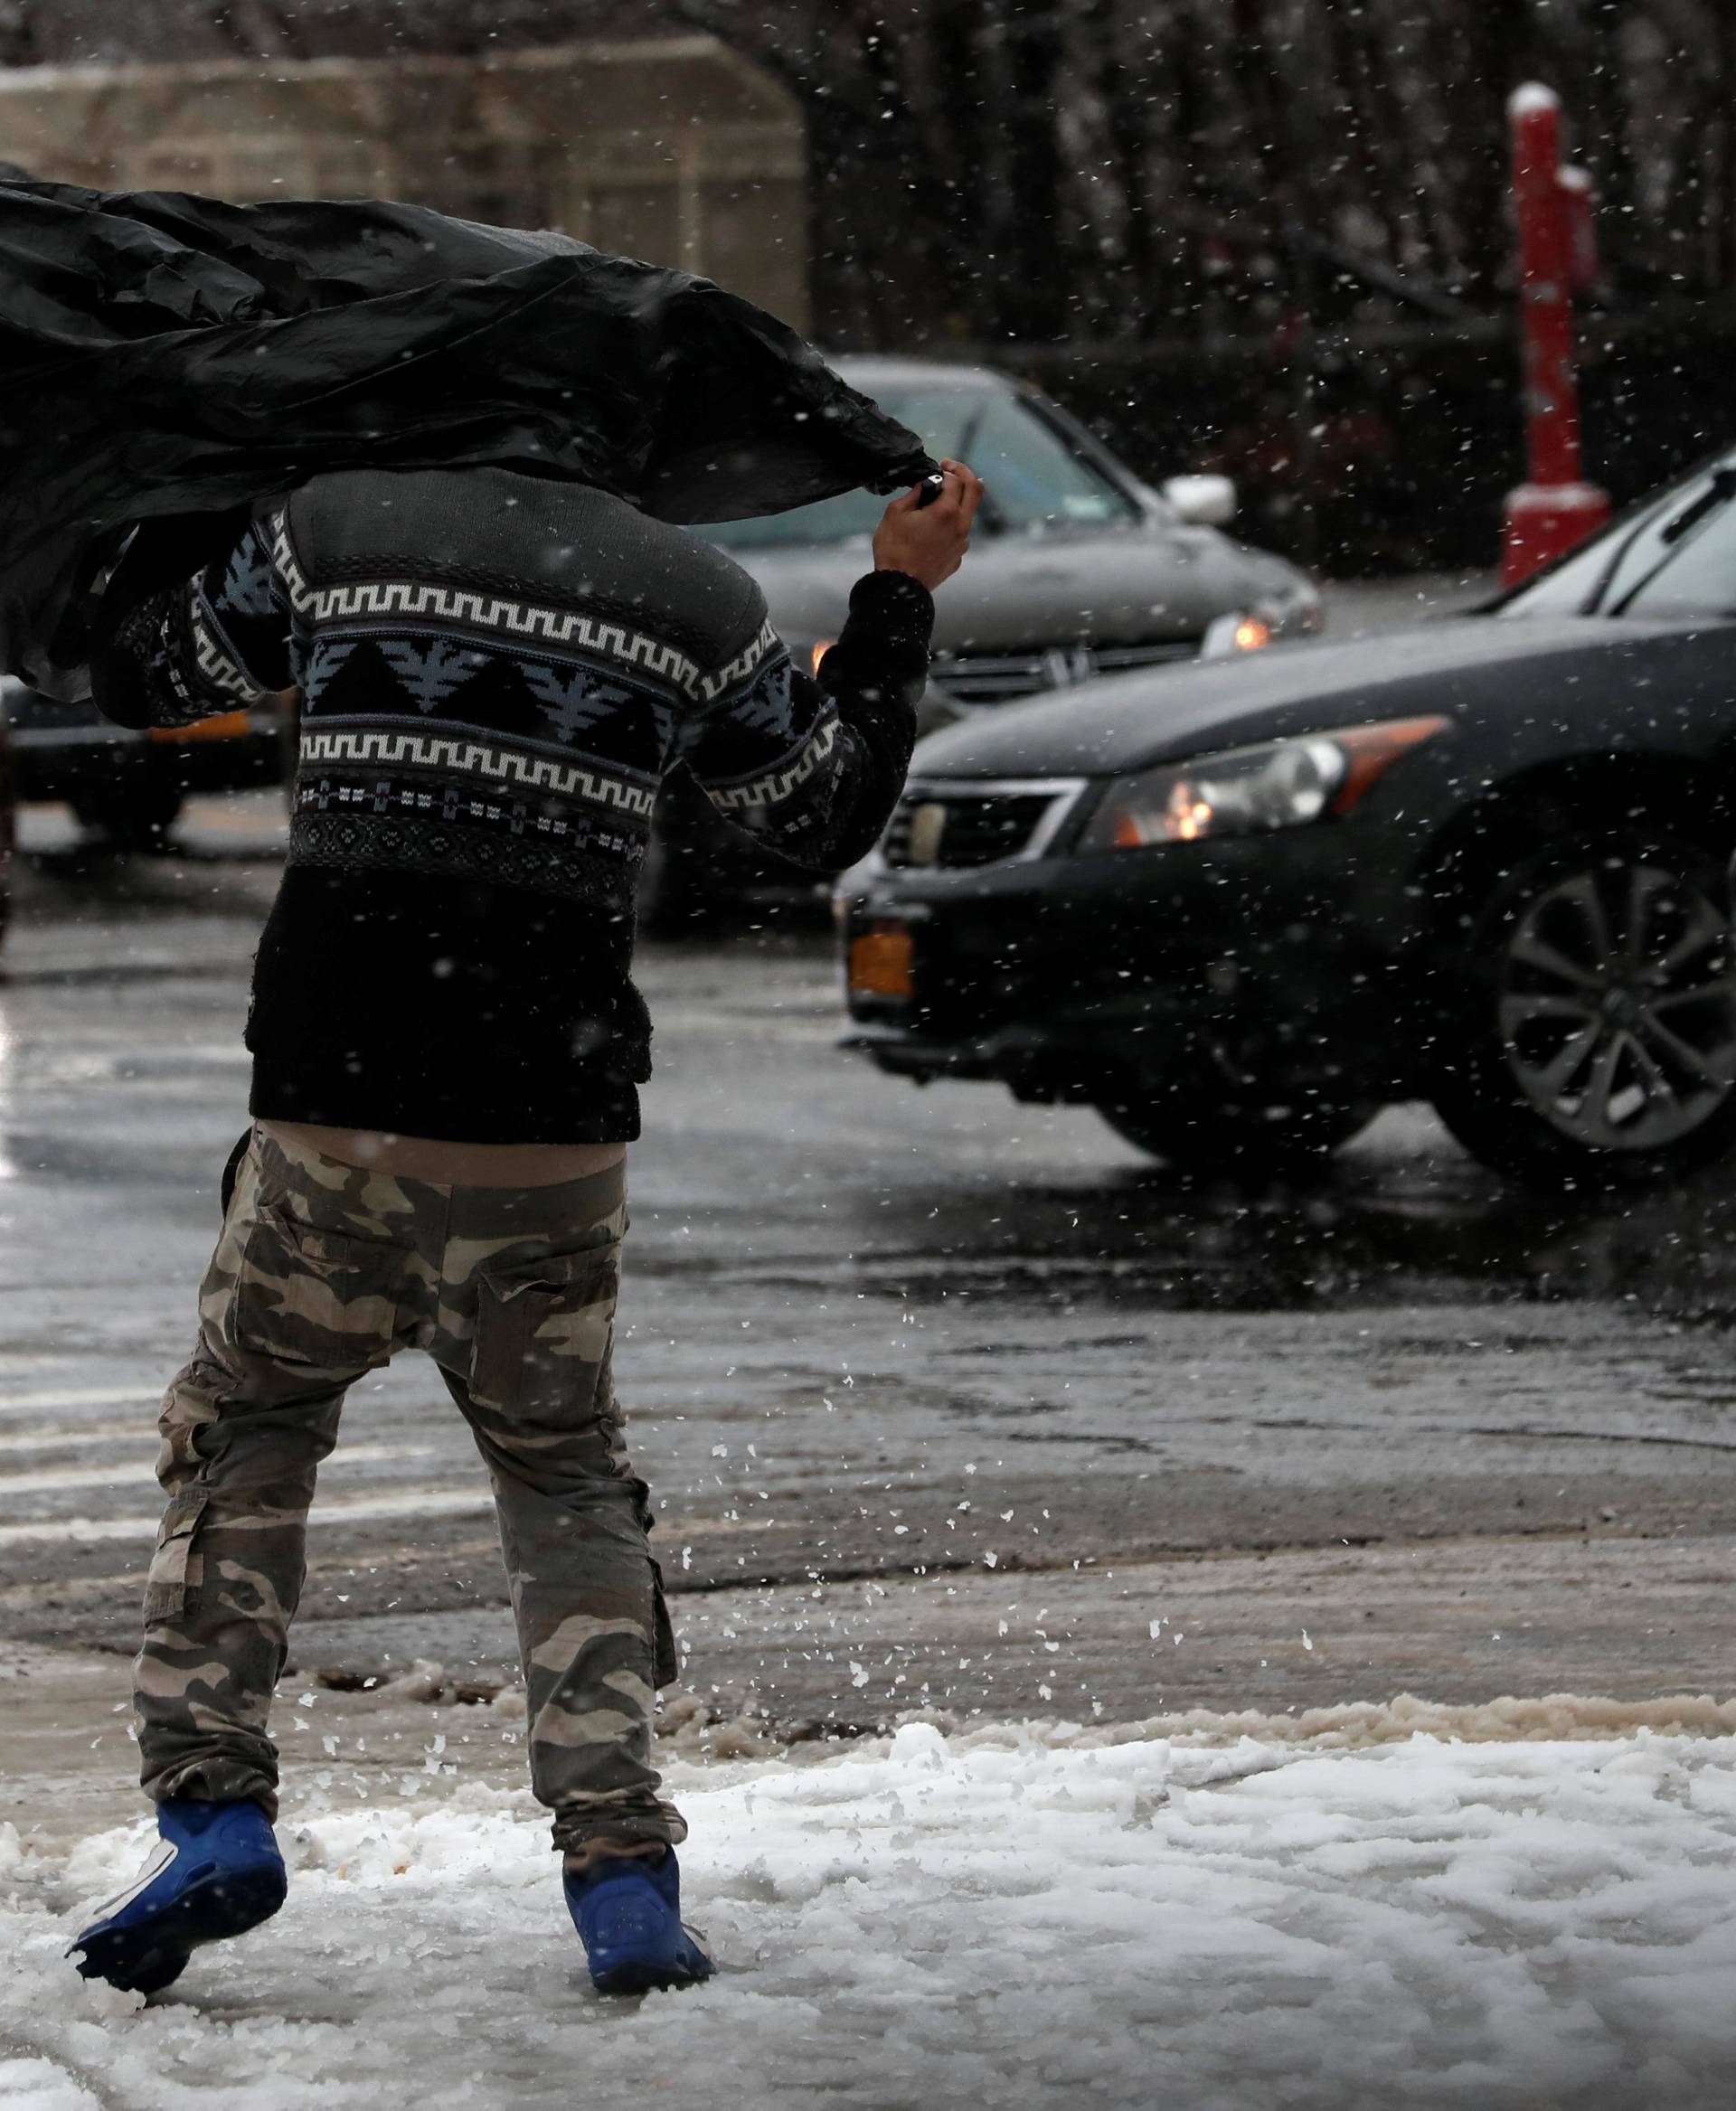 A man struggles in the wind beneath a plastic bag as he walks during a snowstorm in upper Manhattan in New York City